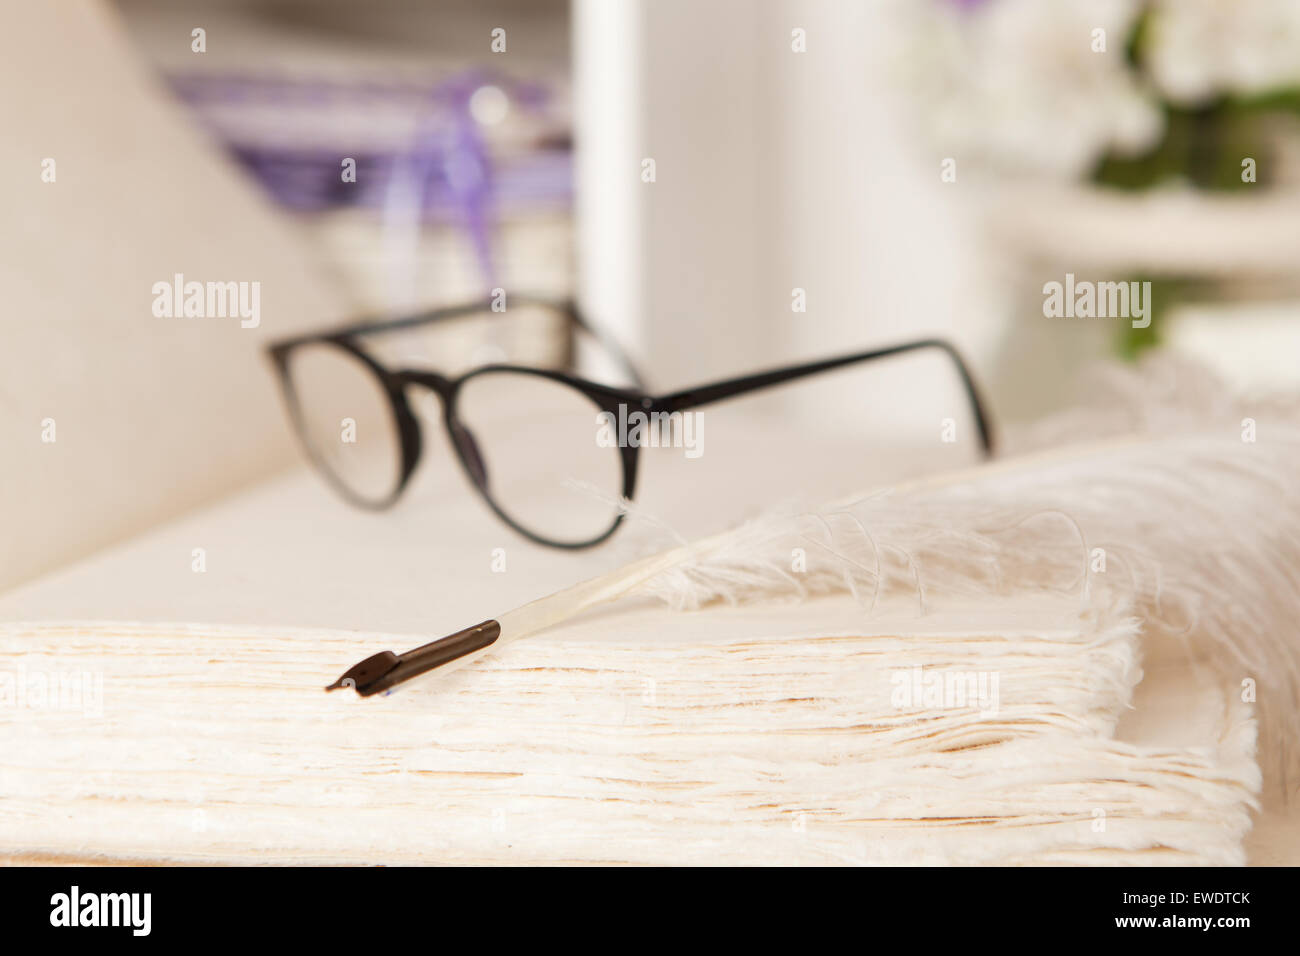 Eyeglasses and fountain pen on a blank page of a hand-bound book Stock Photo